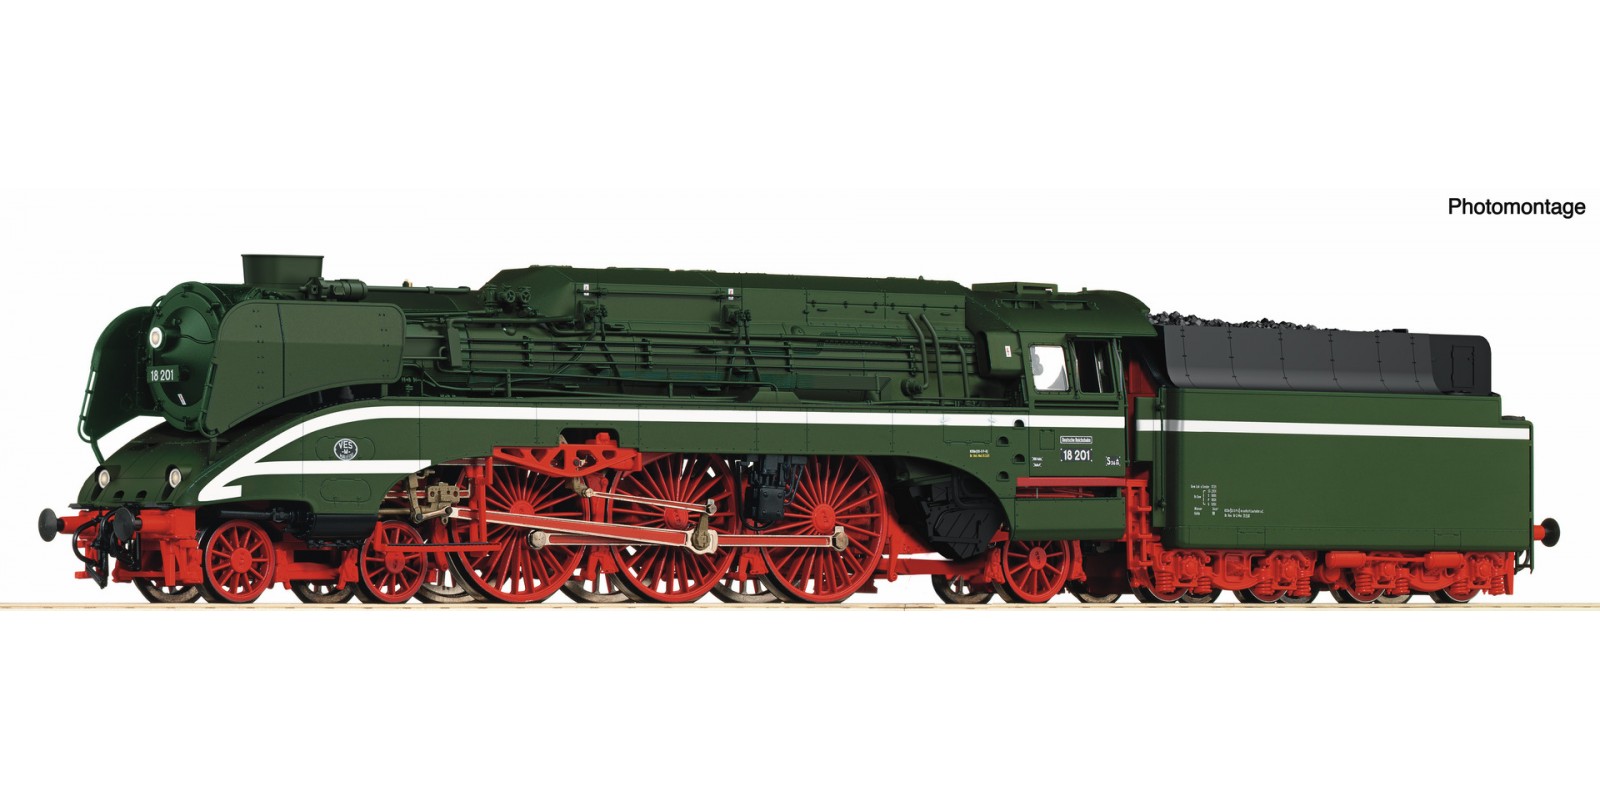 RO7100006 High-speed steam locomoti ve 18 201, coil-fired, DR